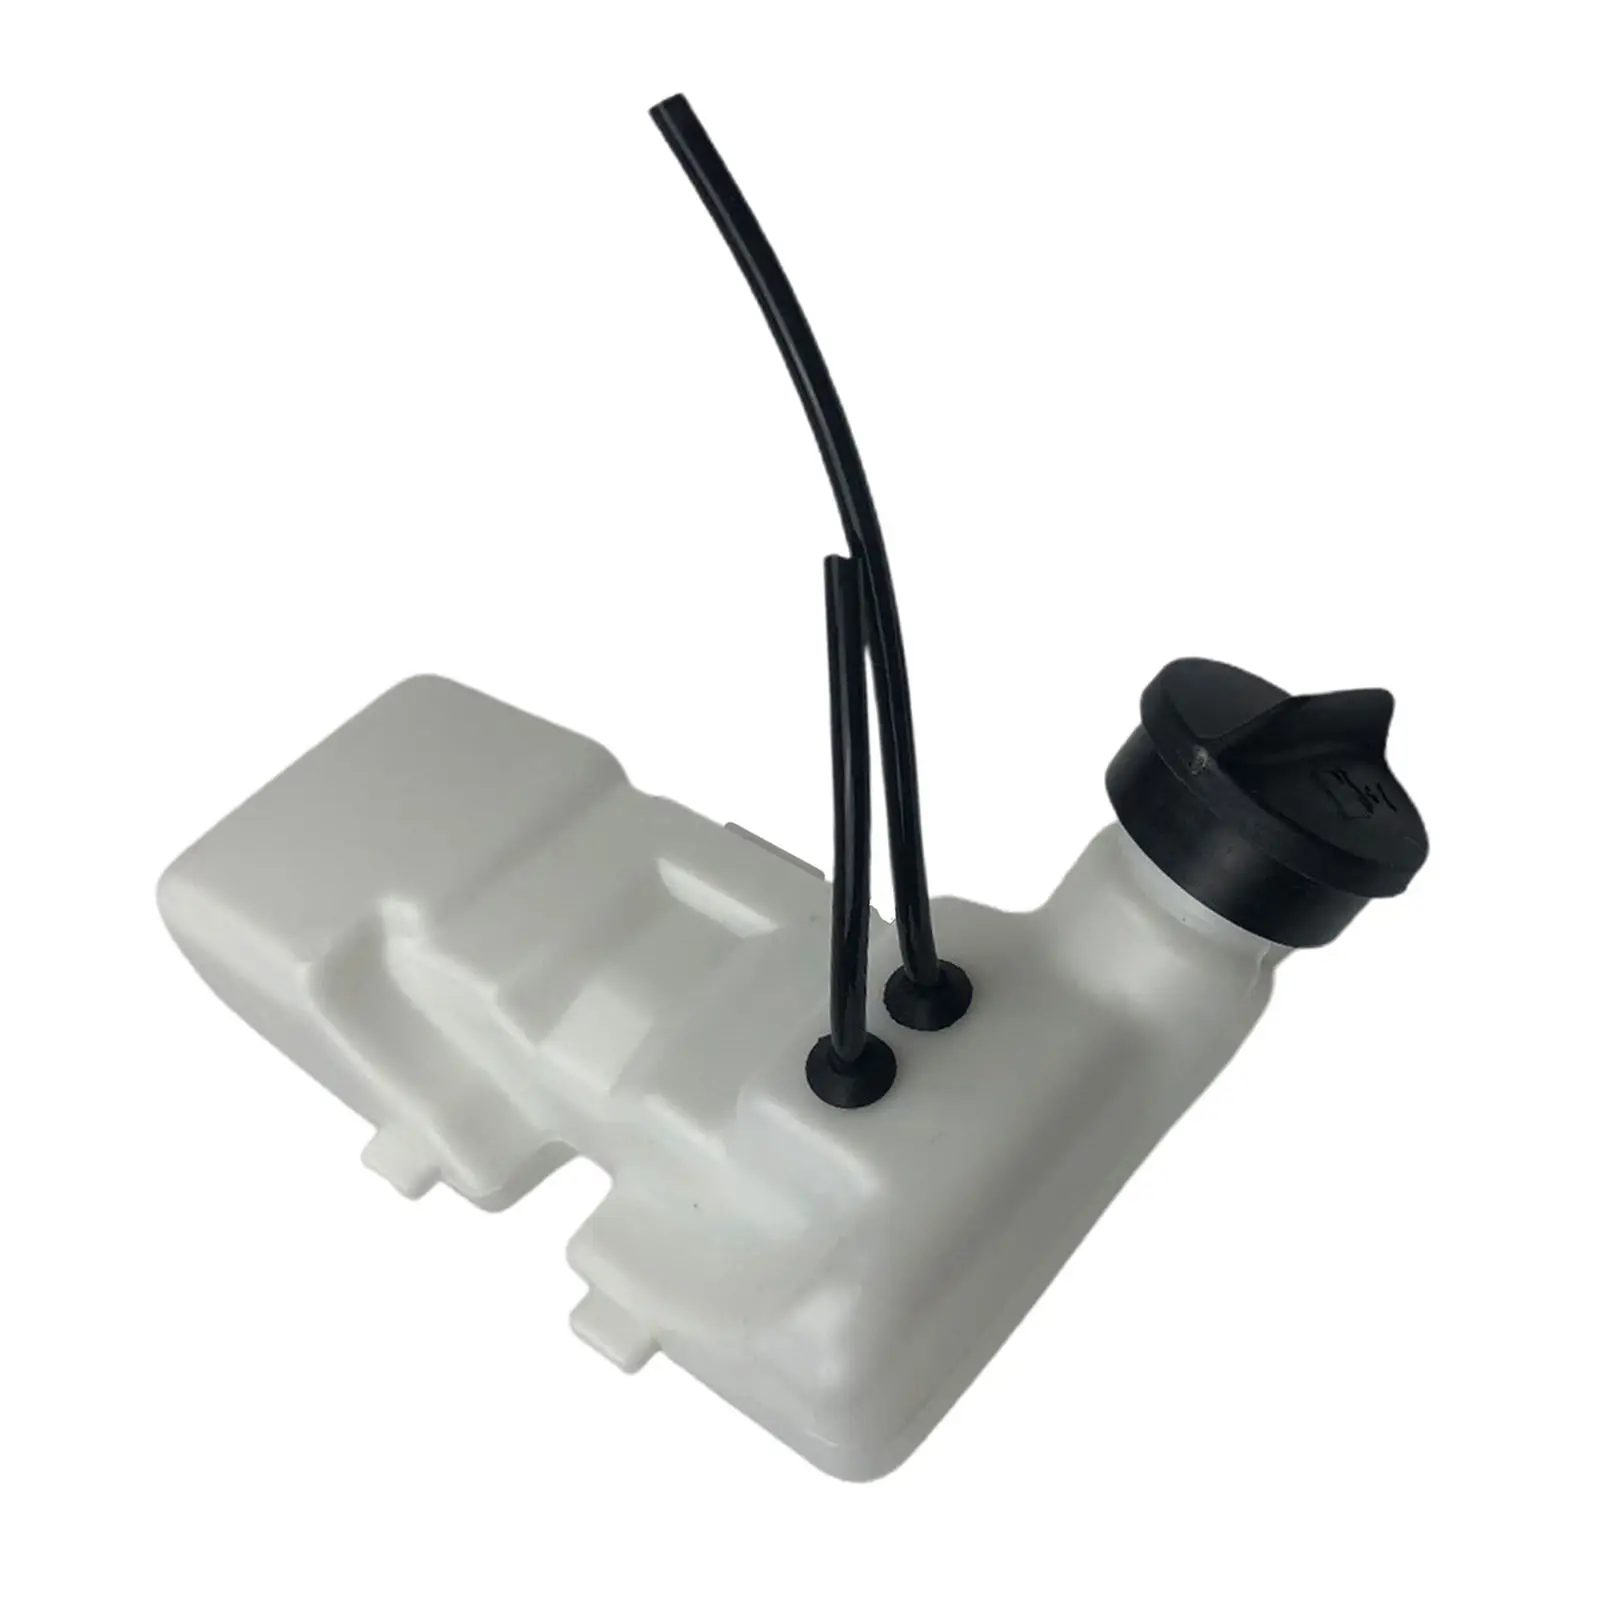 New Replacement Gas Fuel Tank with  Assembly for Stihl FS80R FS80 FS75 FS76 FS74 FS72 FS85 KM85 HT75 Trimmer Parts